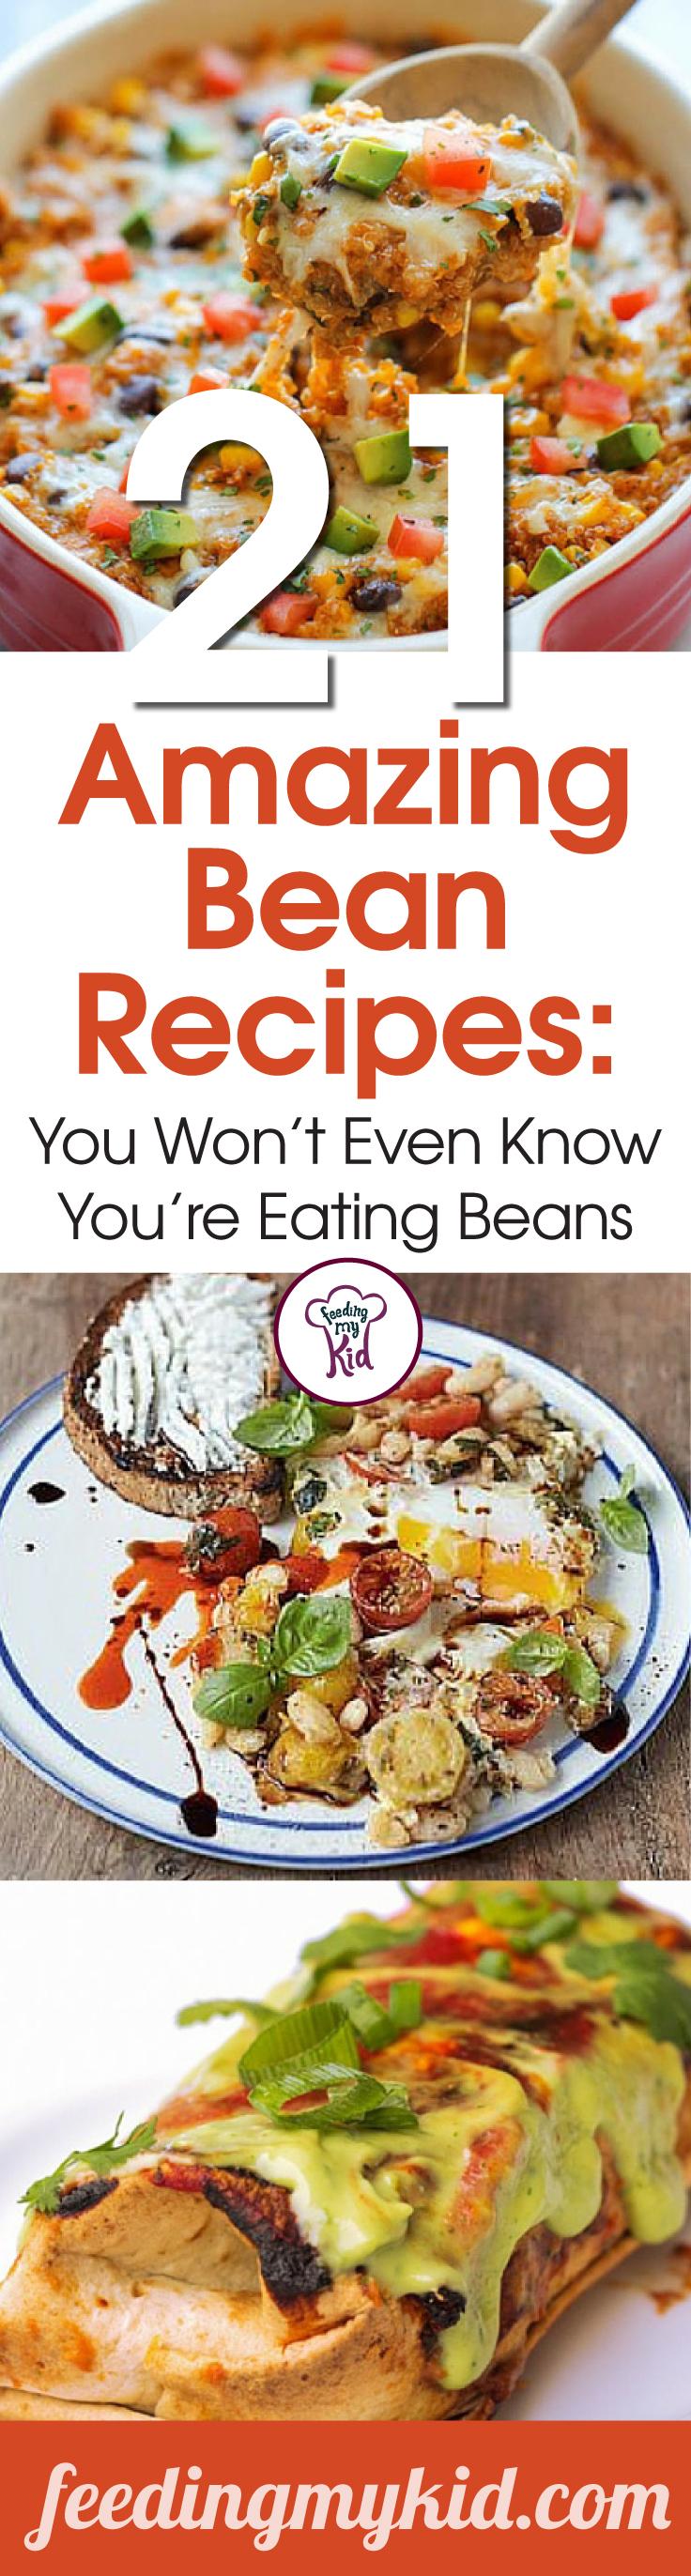 21 Amazing Bean Recipes: You won't Even Know You're Eating Beans - We understand what it's like to have a picky eater here, which is why we made this list of recipes just for you. From a fiesta corn and avocado salad to a black bean quinoa burger; these recipes are sure to please even the pickiest of eaters.